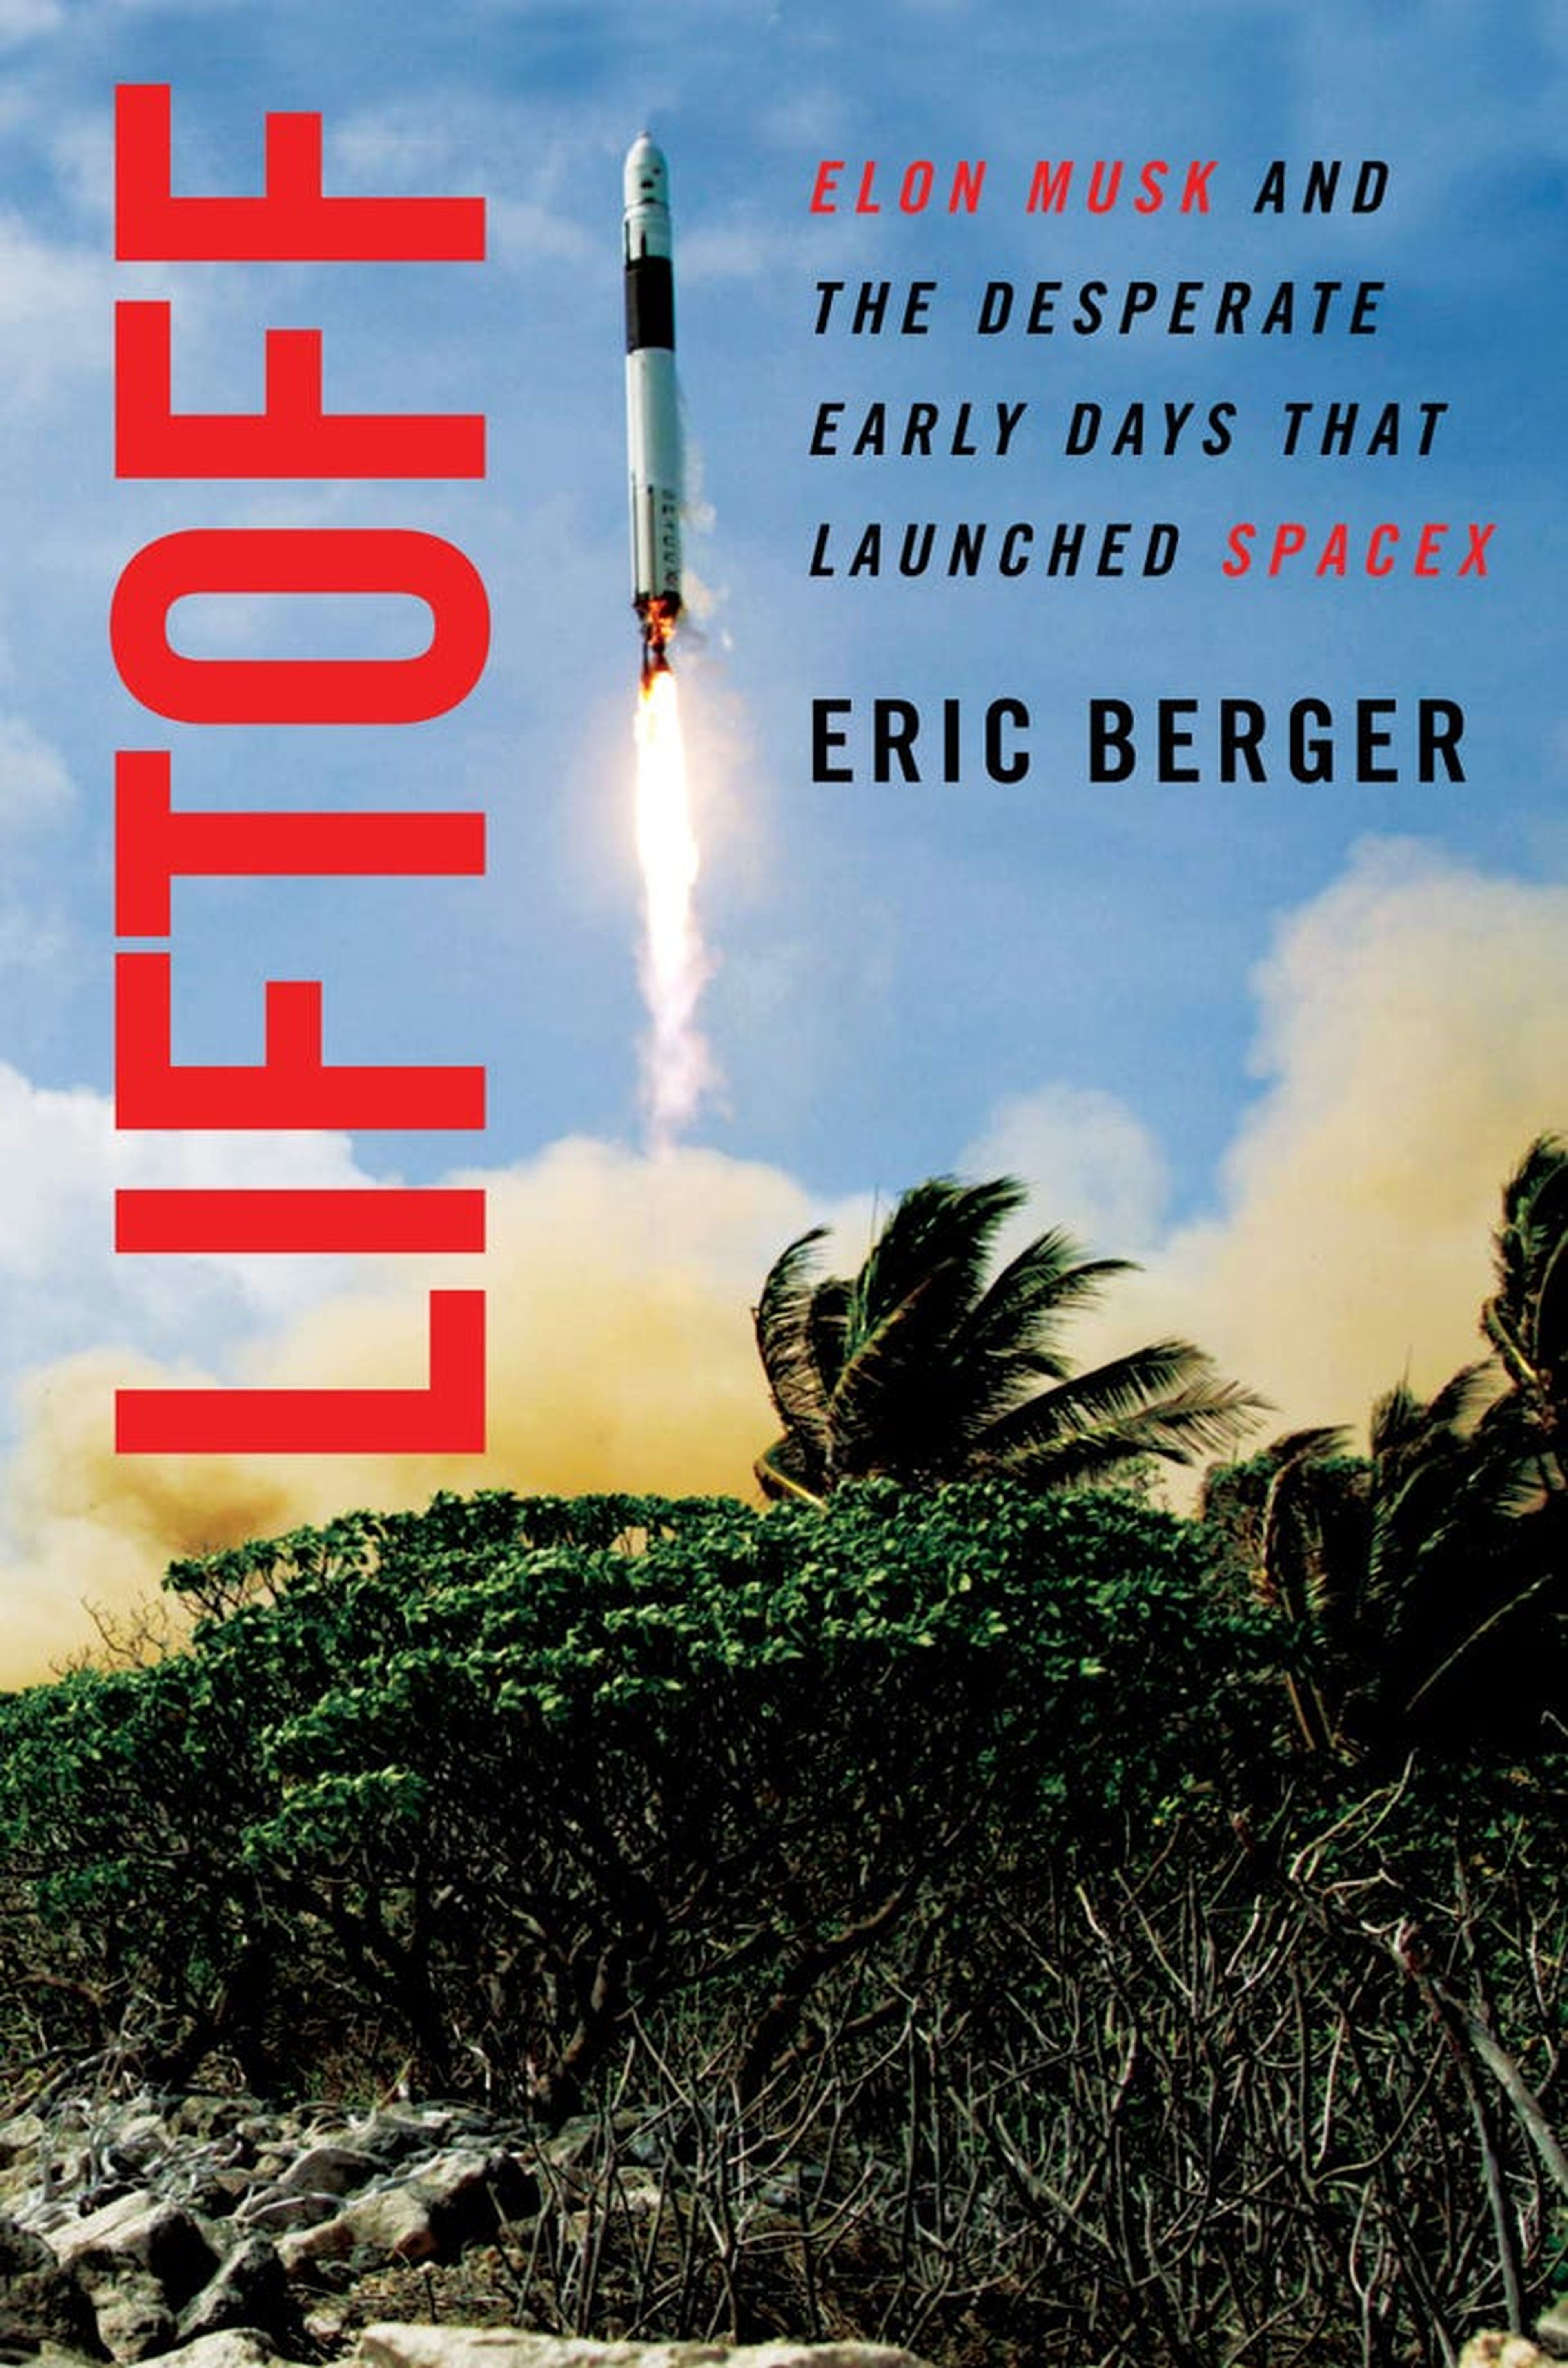 'Liftoff: Elon Musk and the Desperate Early Days That Launched SpaceX'